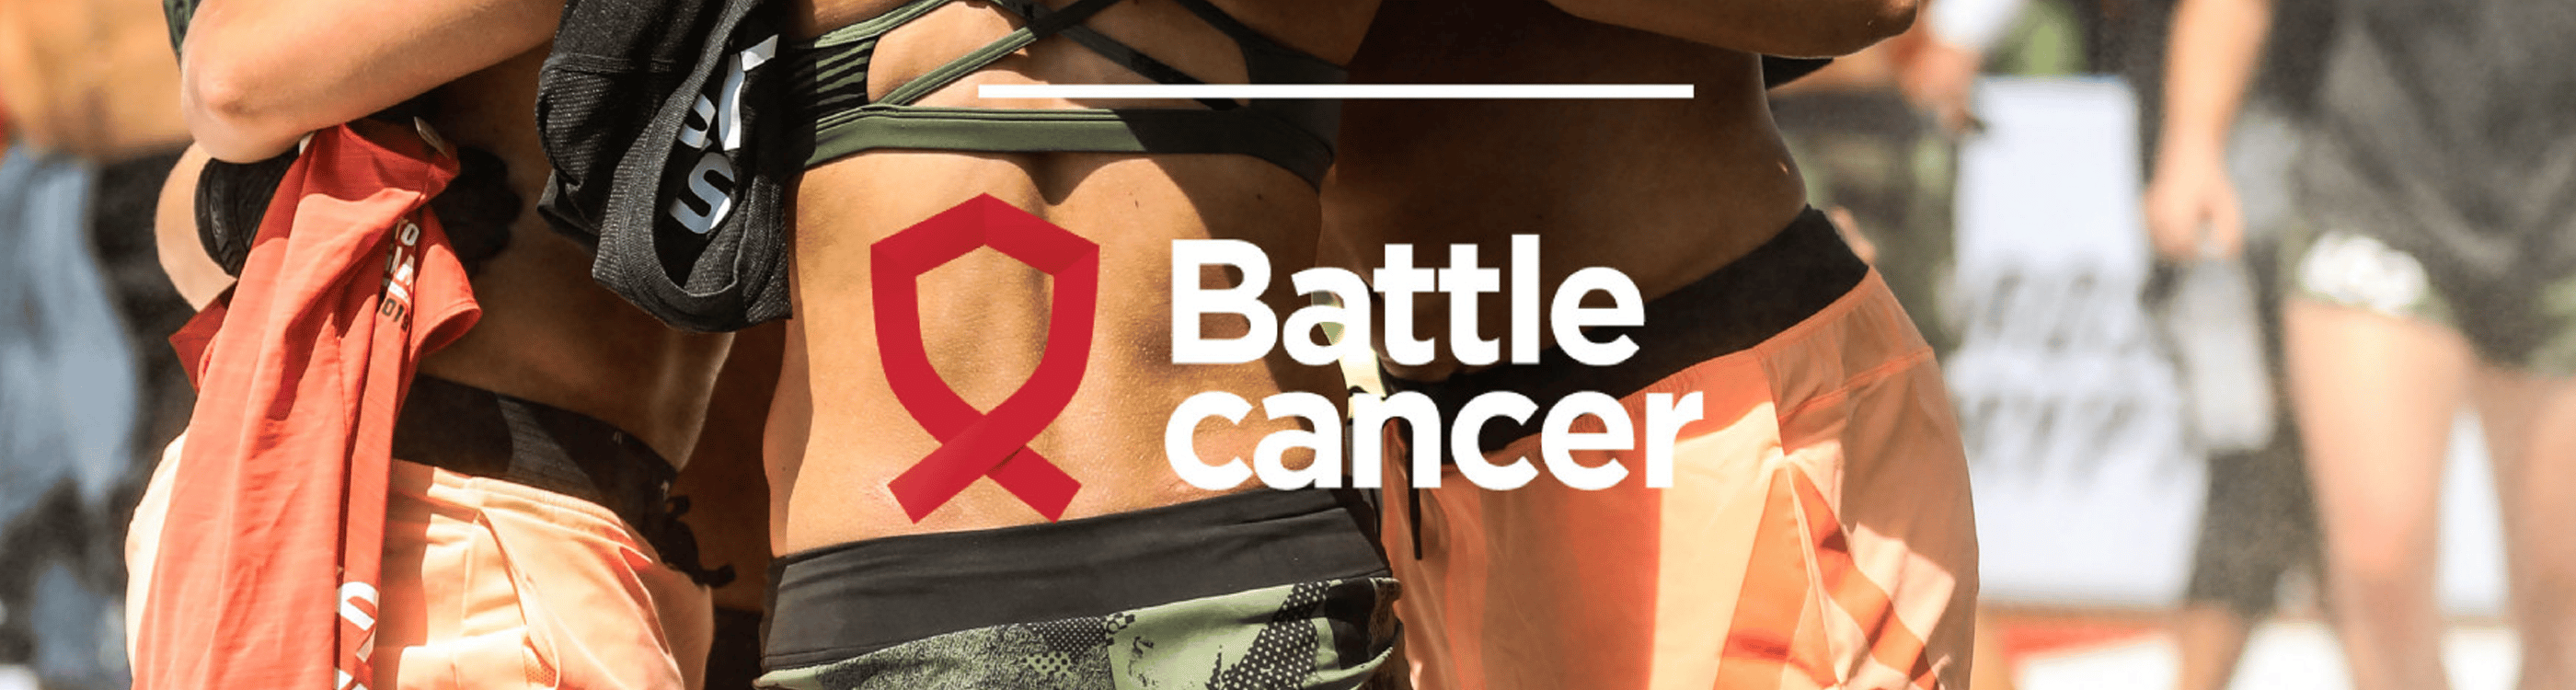 Partnership with Battle Cancer